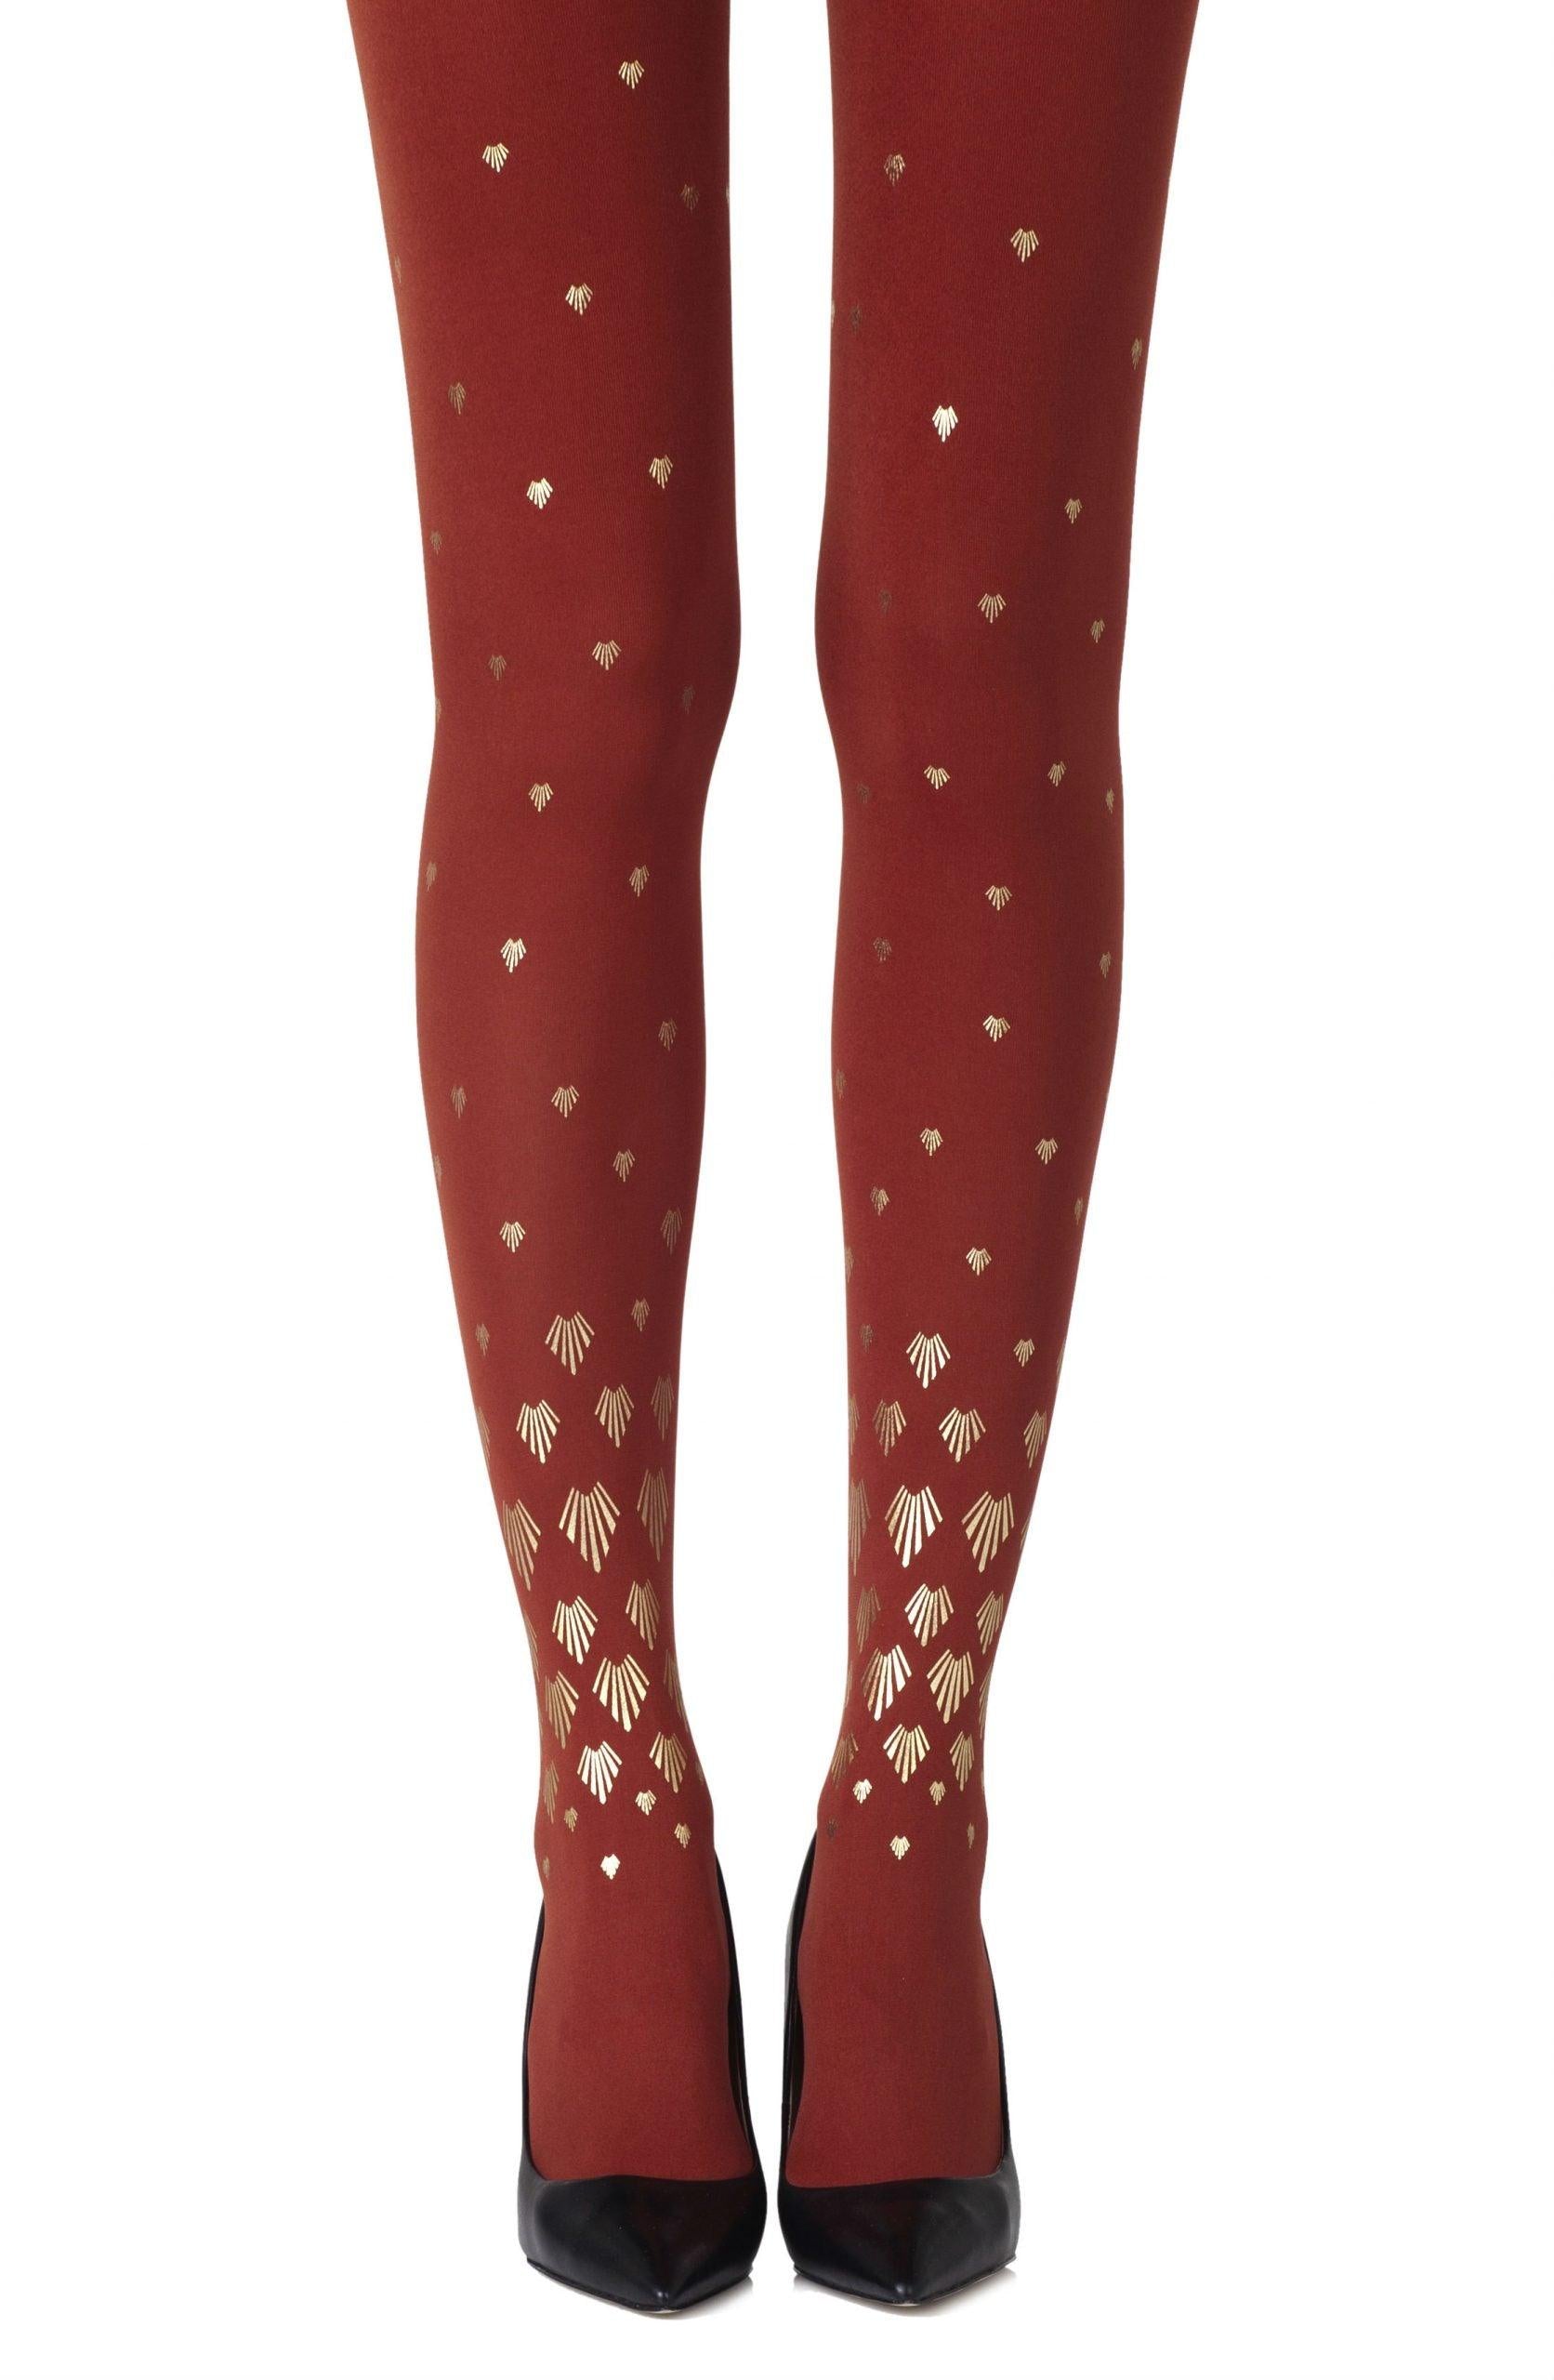 Zohara "Shell Out" Rust Print Tights - Sydney Rose Lingerie 